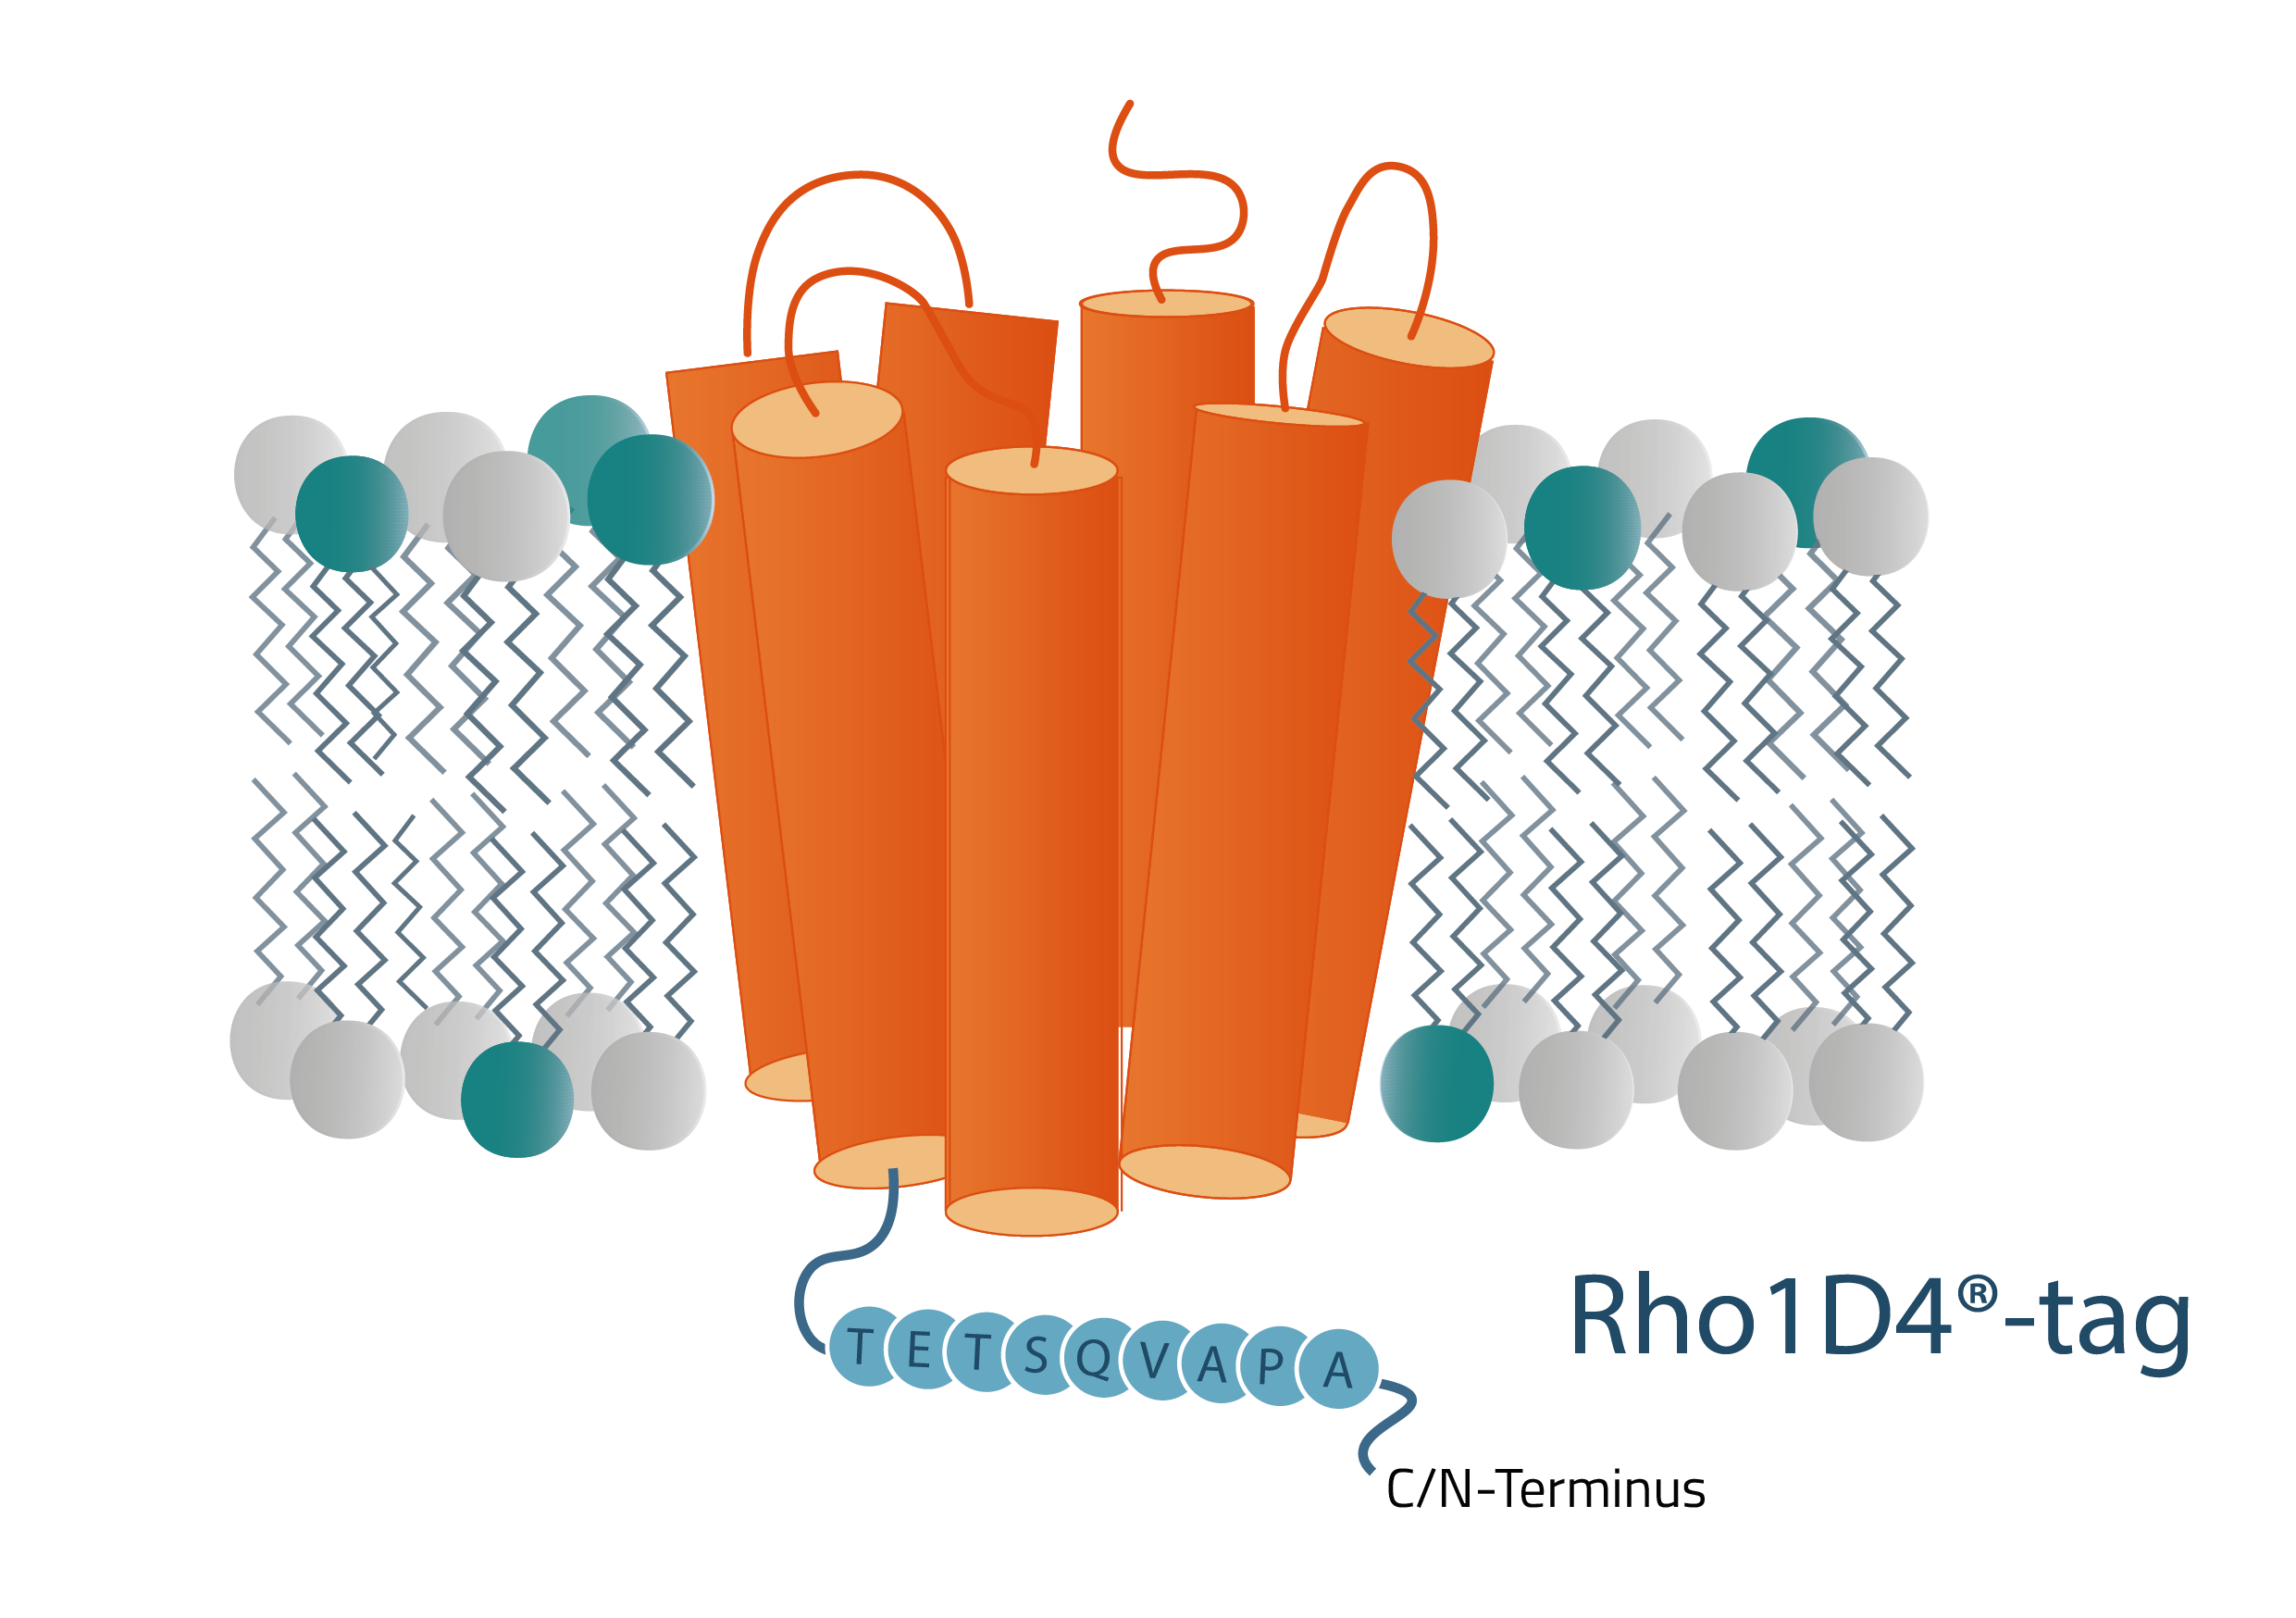 Rho1D4-tag membrane protein